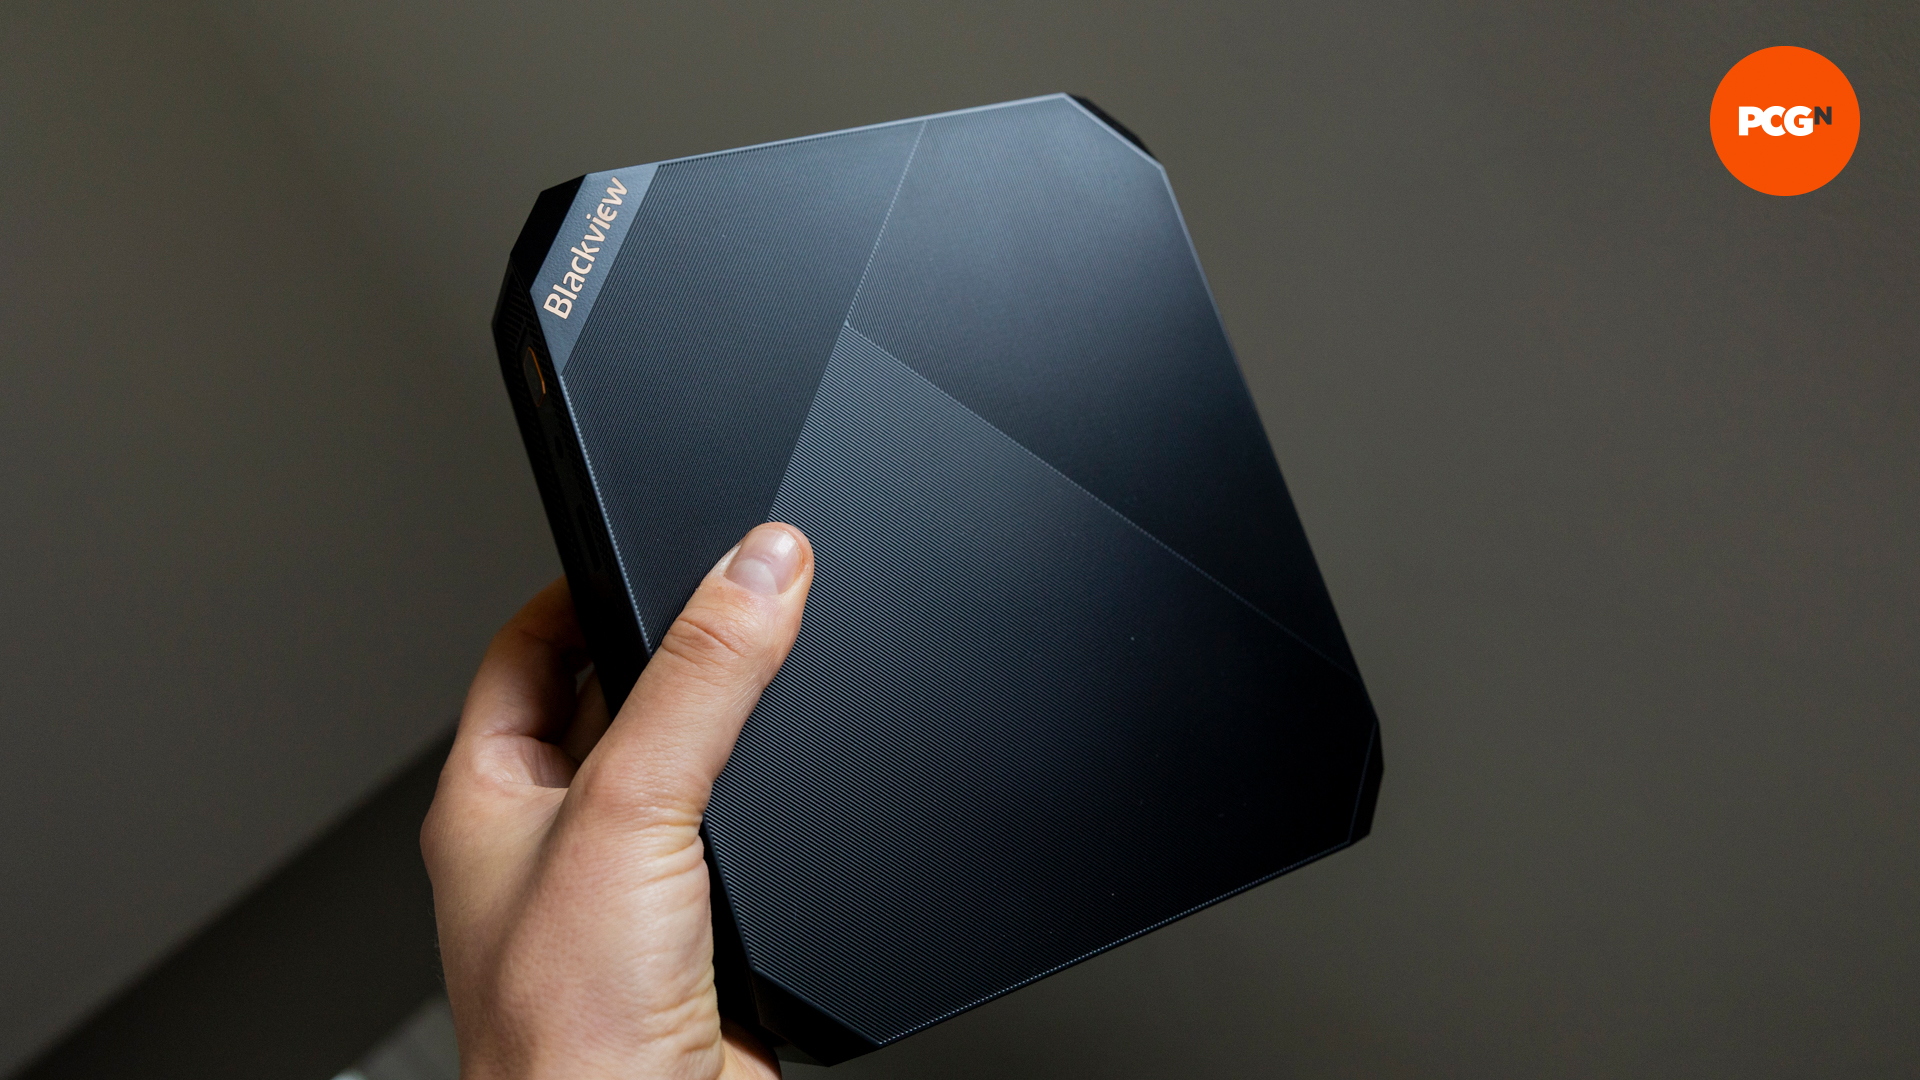 The Blackview MP200 mini gaming PC held in someone's hand to show the size